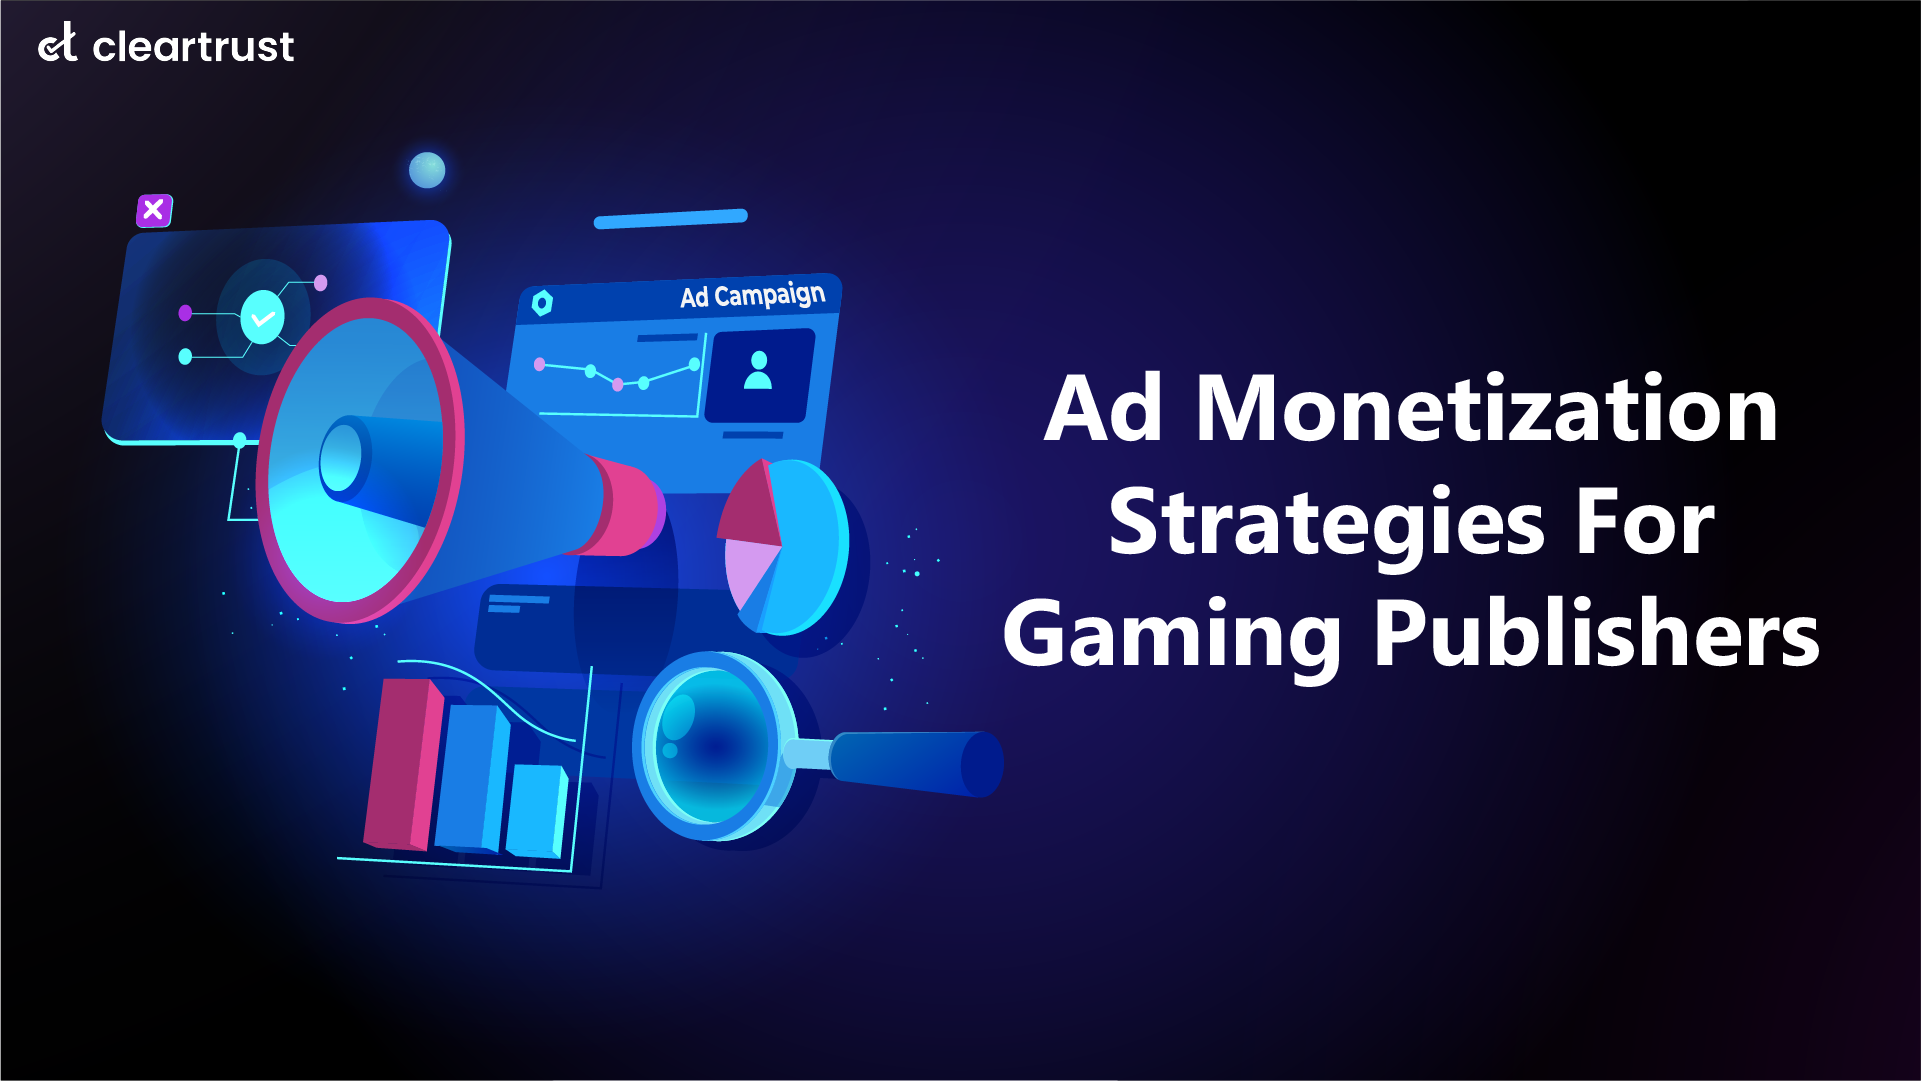 Ad monetization strategies for gaming publishers